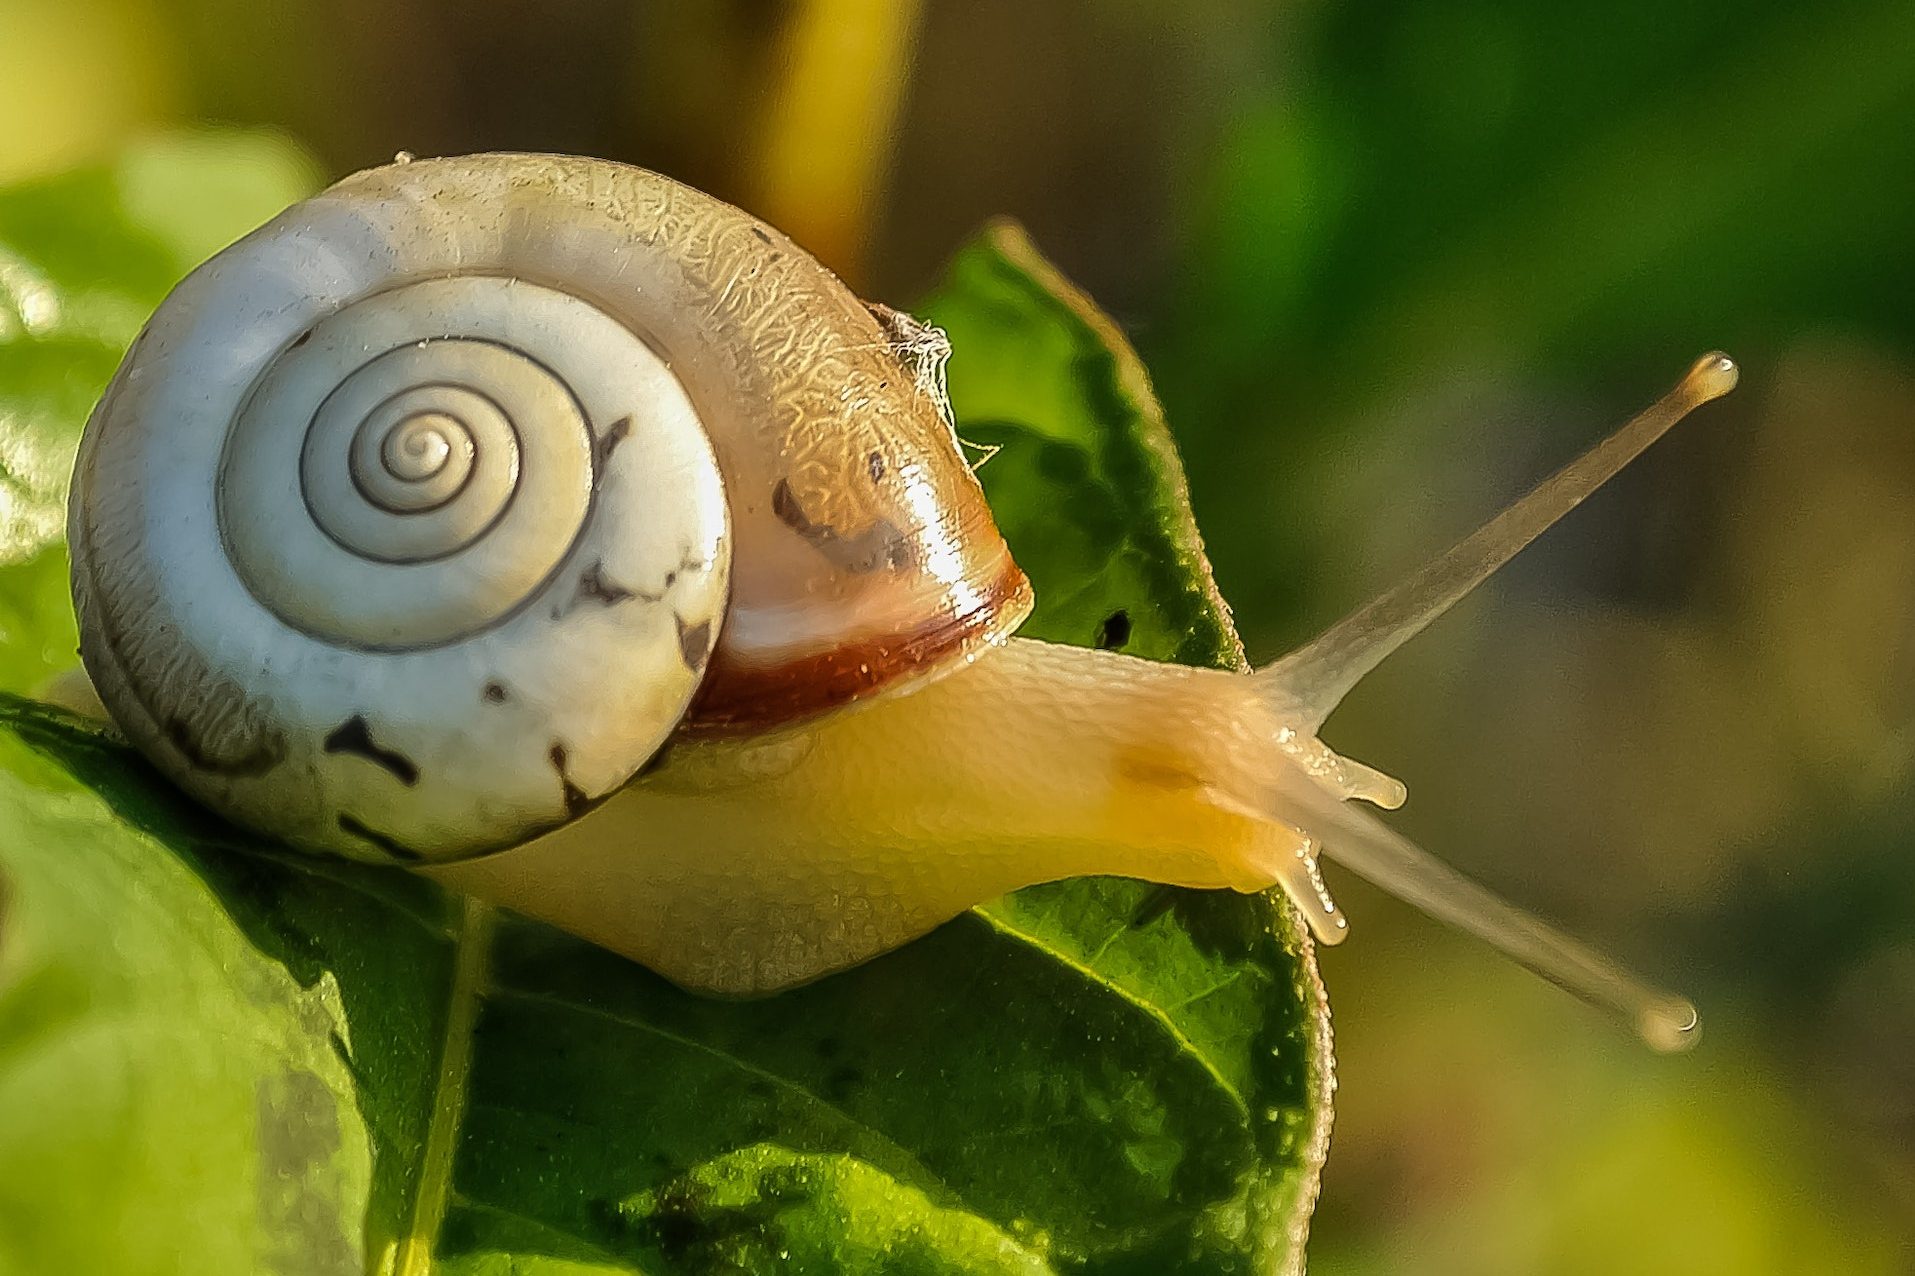 Snail with brown shell sliding along green leaf